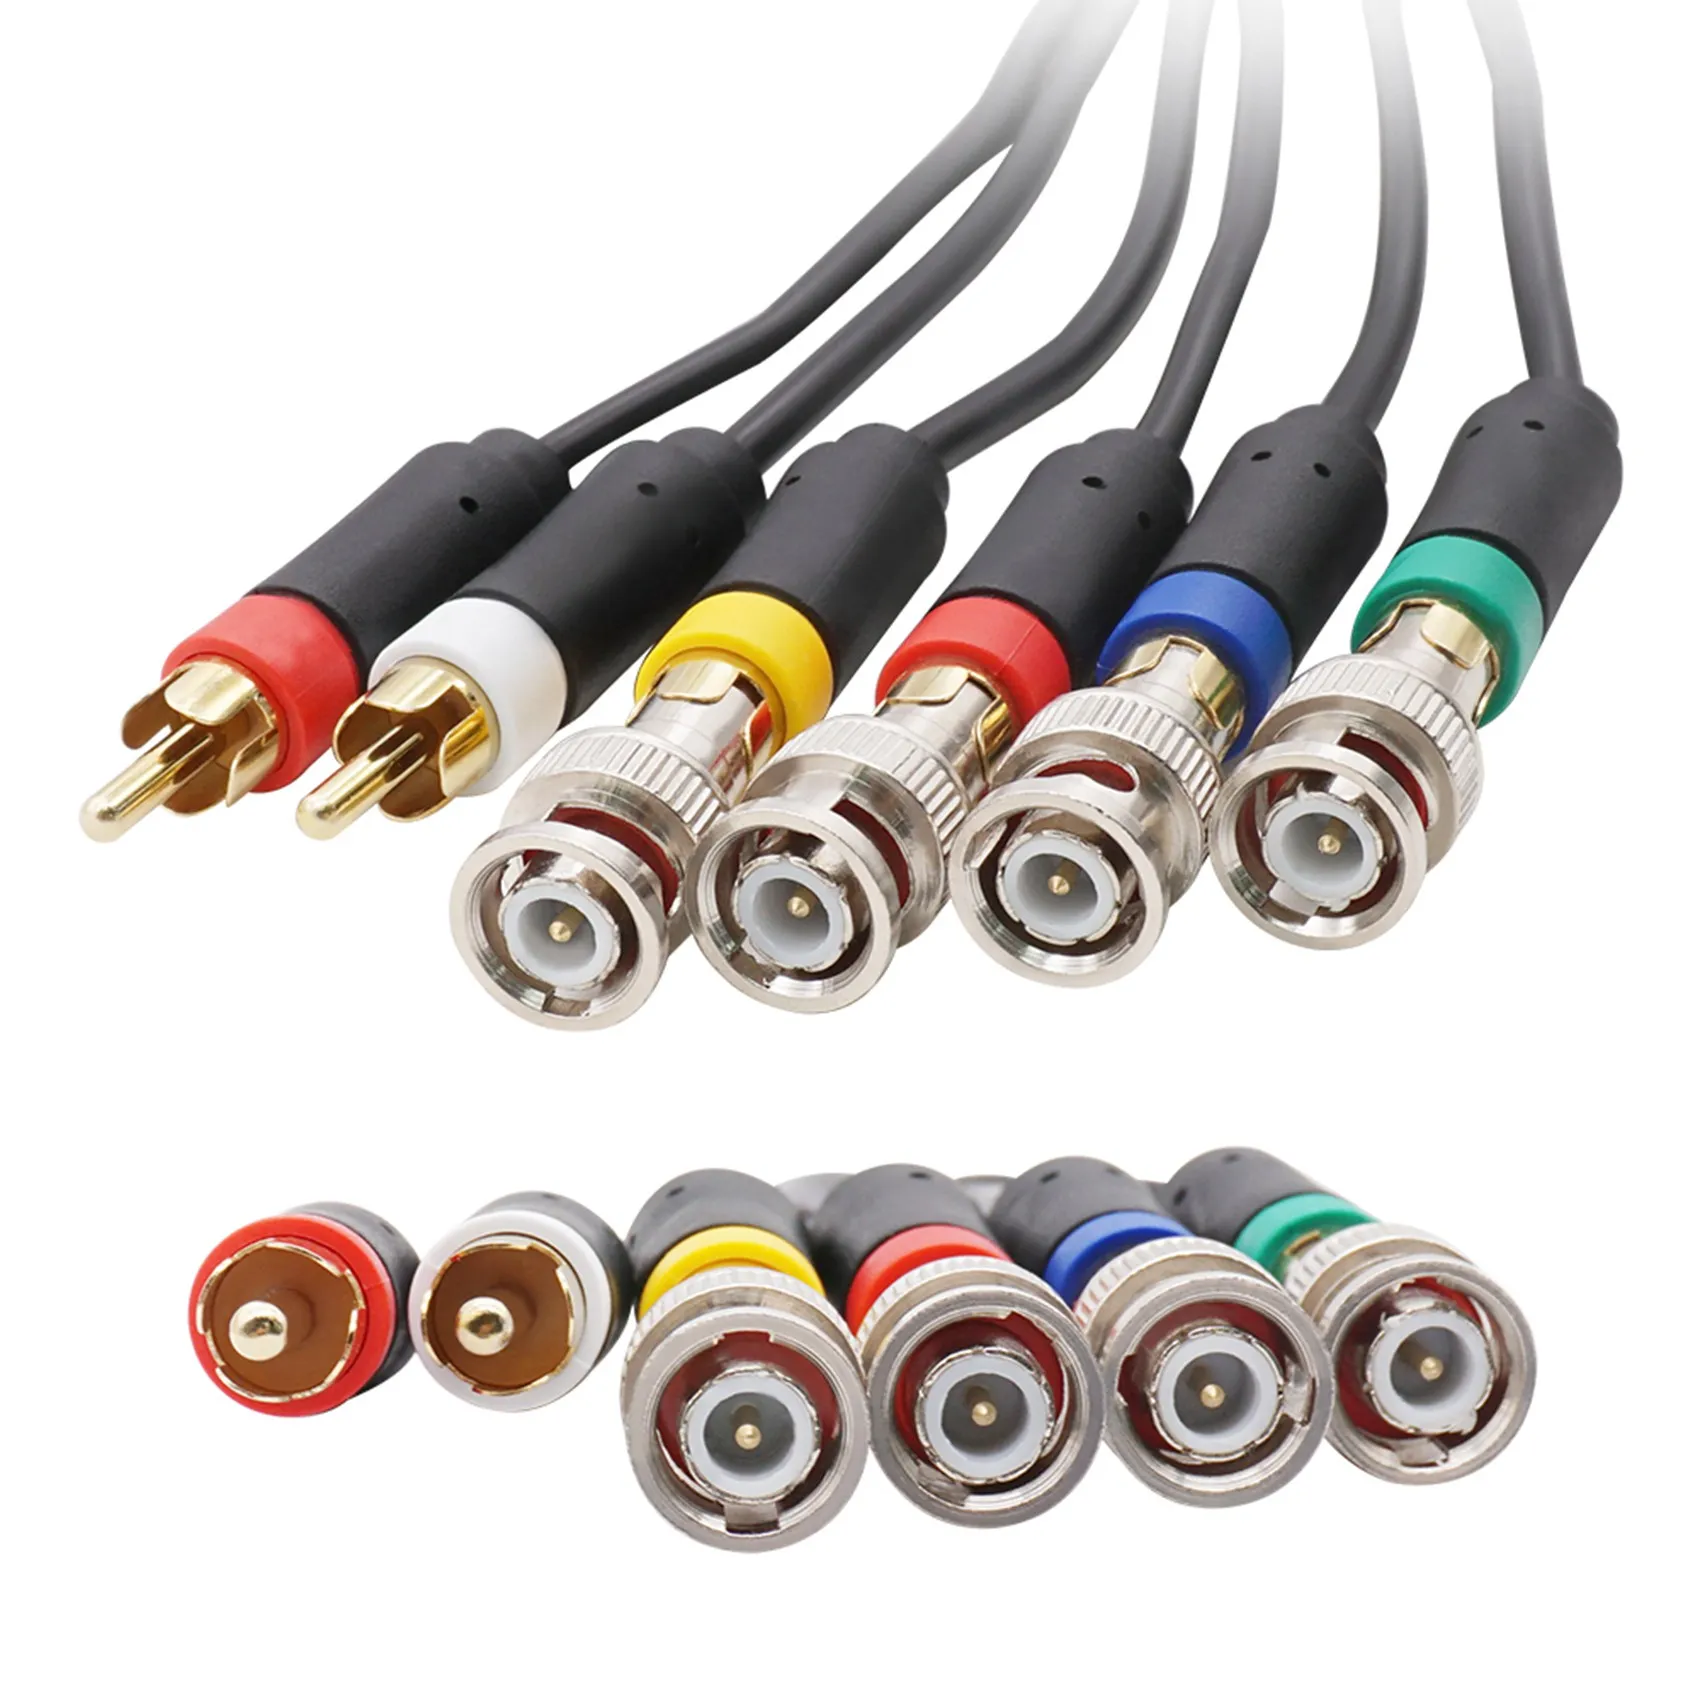 RGB/RGBS Cable for N64 SFC SNES NGC Video Consoles Composite Cable with Strong Stability